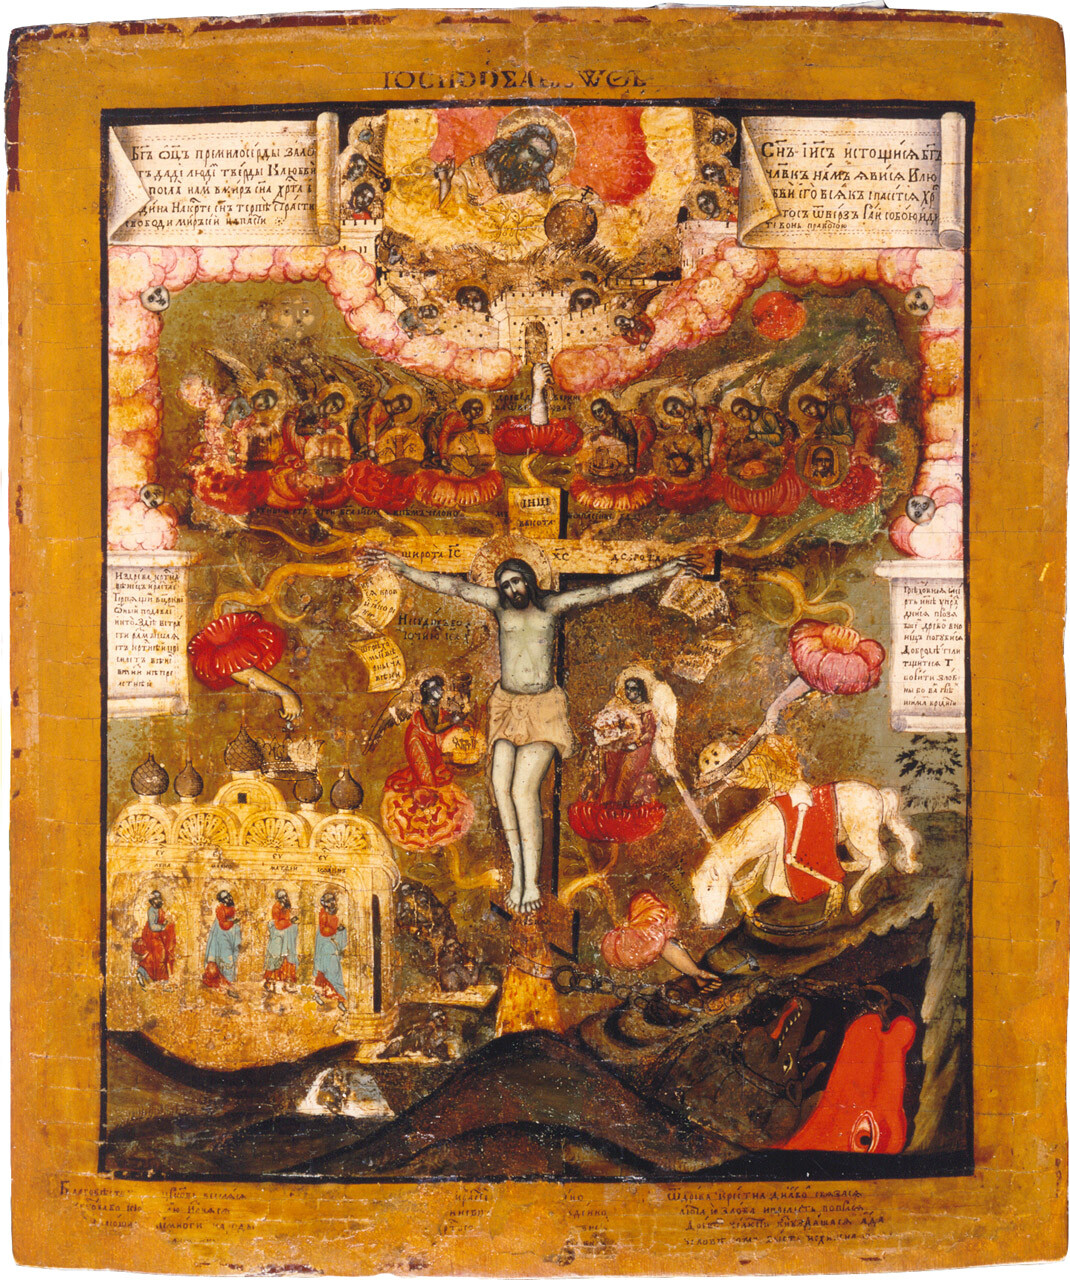 Crucifixion “The Fruits of Christ’s Passion”